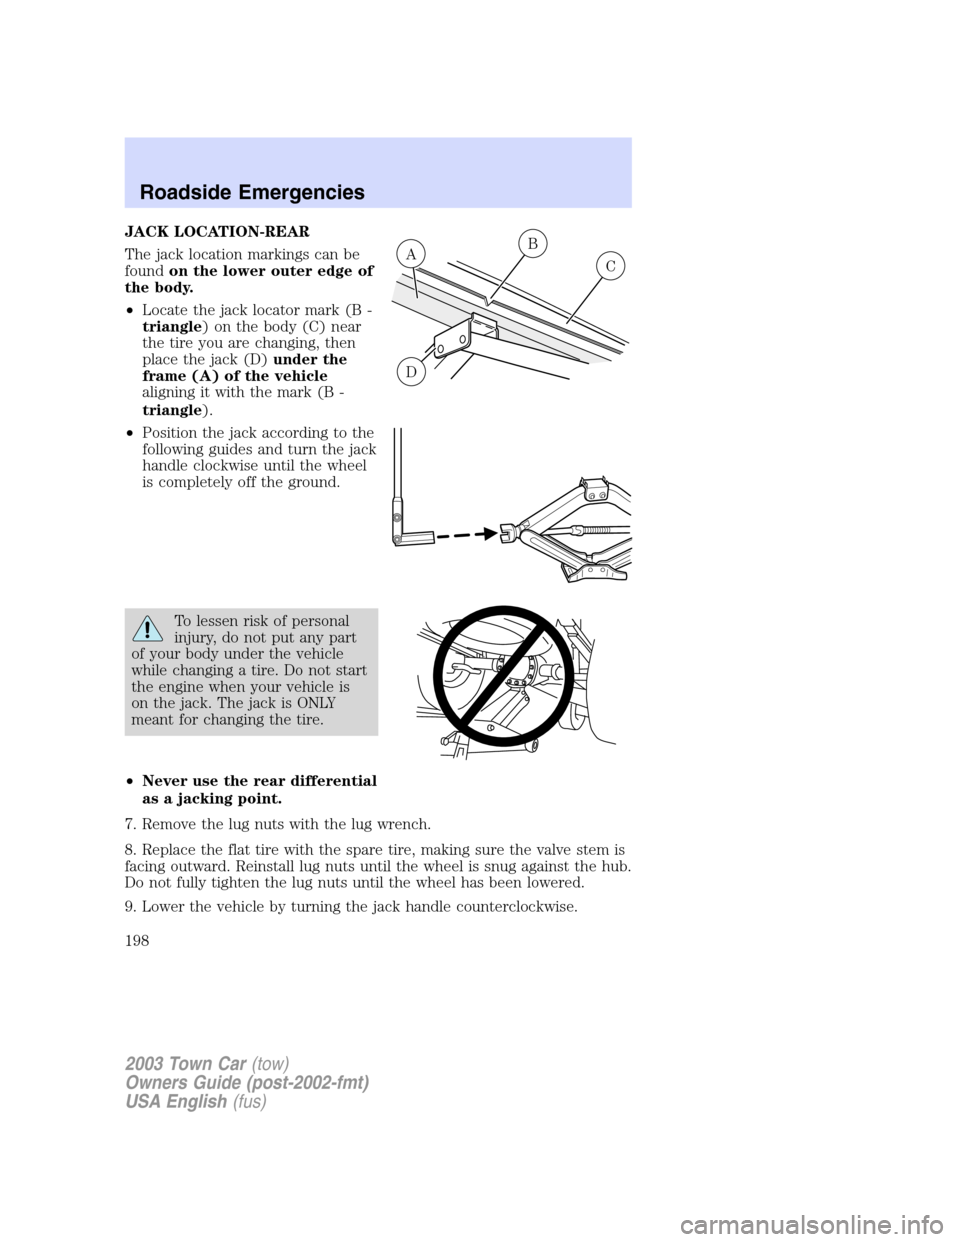 LINCOLN TOWN CAR 2003  Owners Manual JACK LOCATION-REAR
The jack location markings can be
foundon the lower outer edge of
the body.
•Locate the jack locator mark (B -
triangle) on the body (C) near
the tire you are changing, then
place